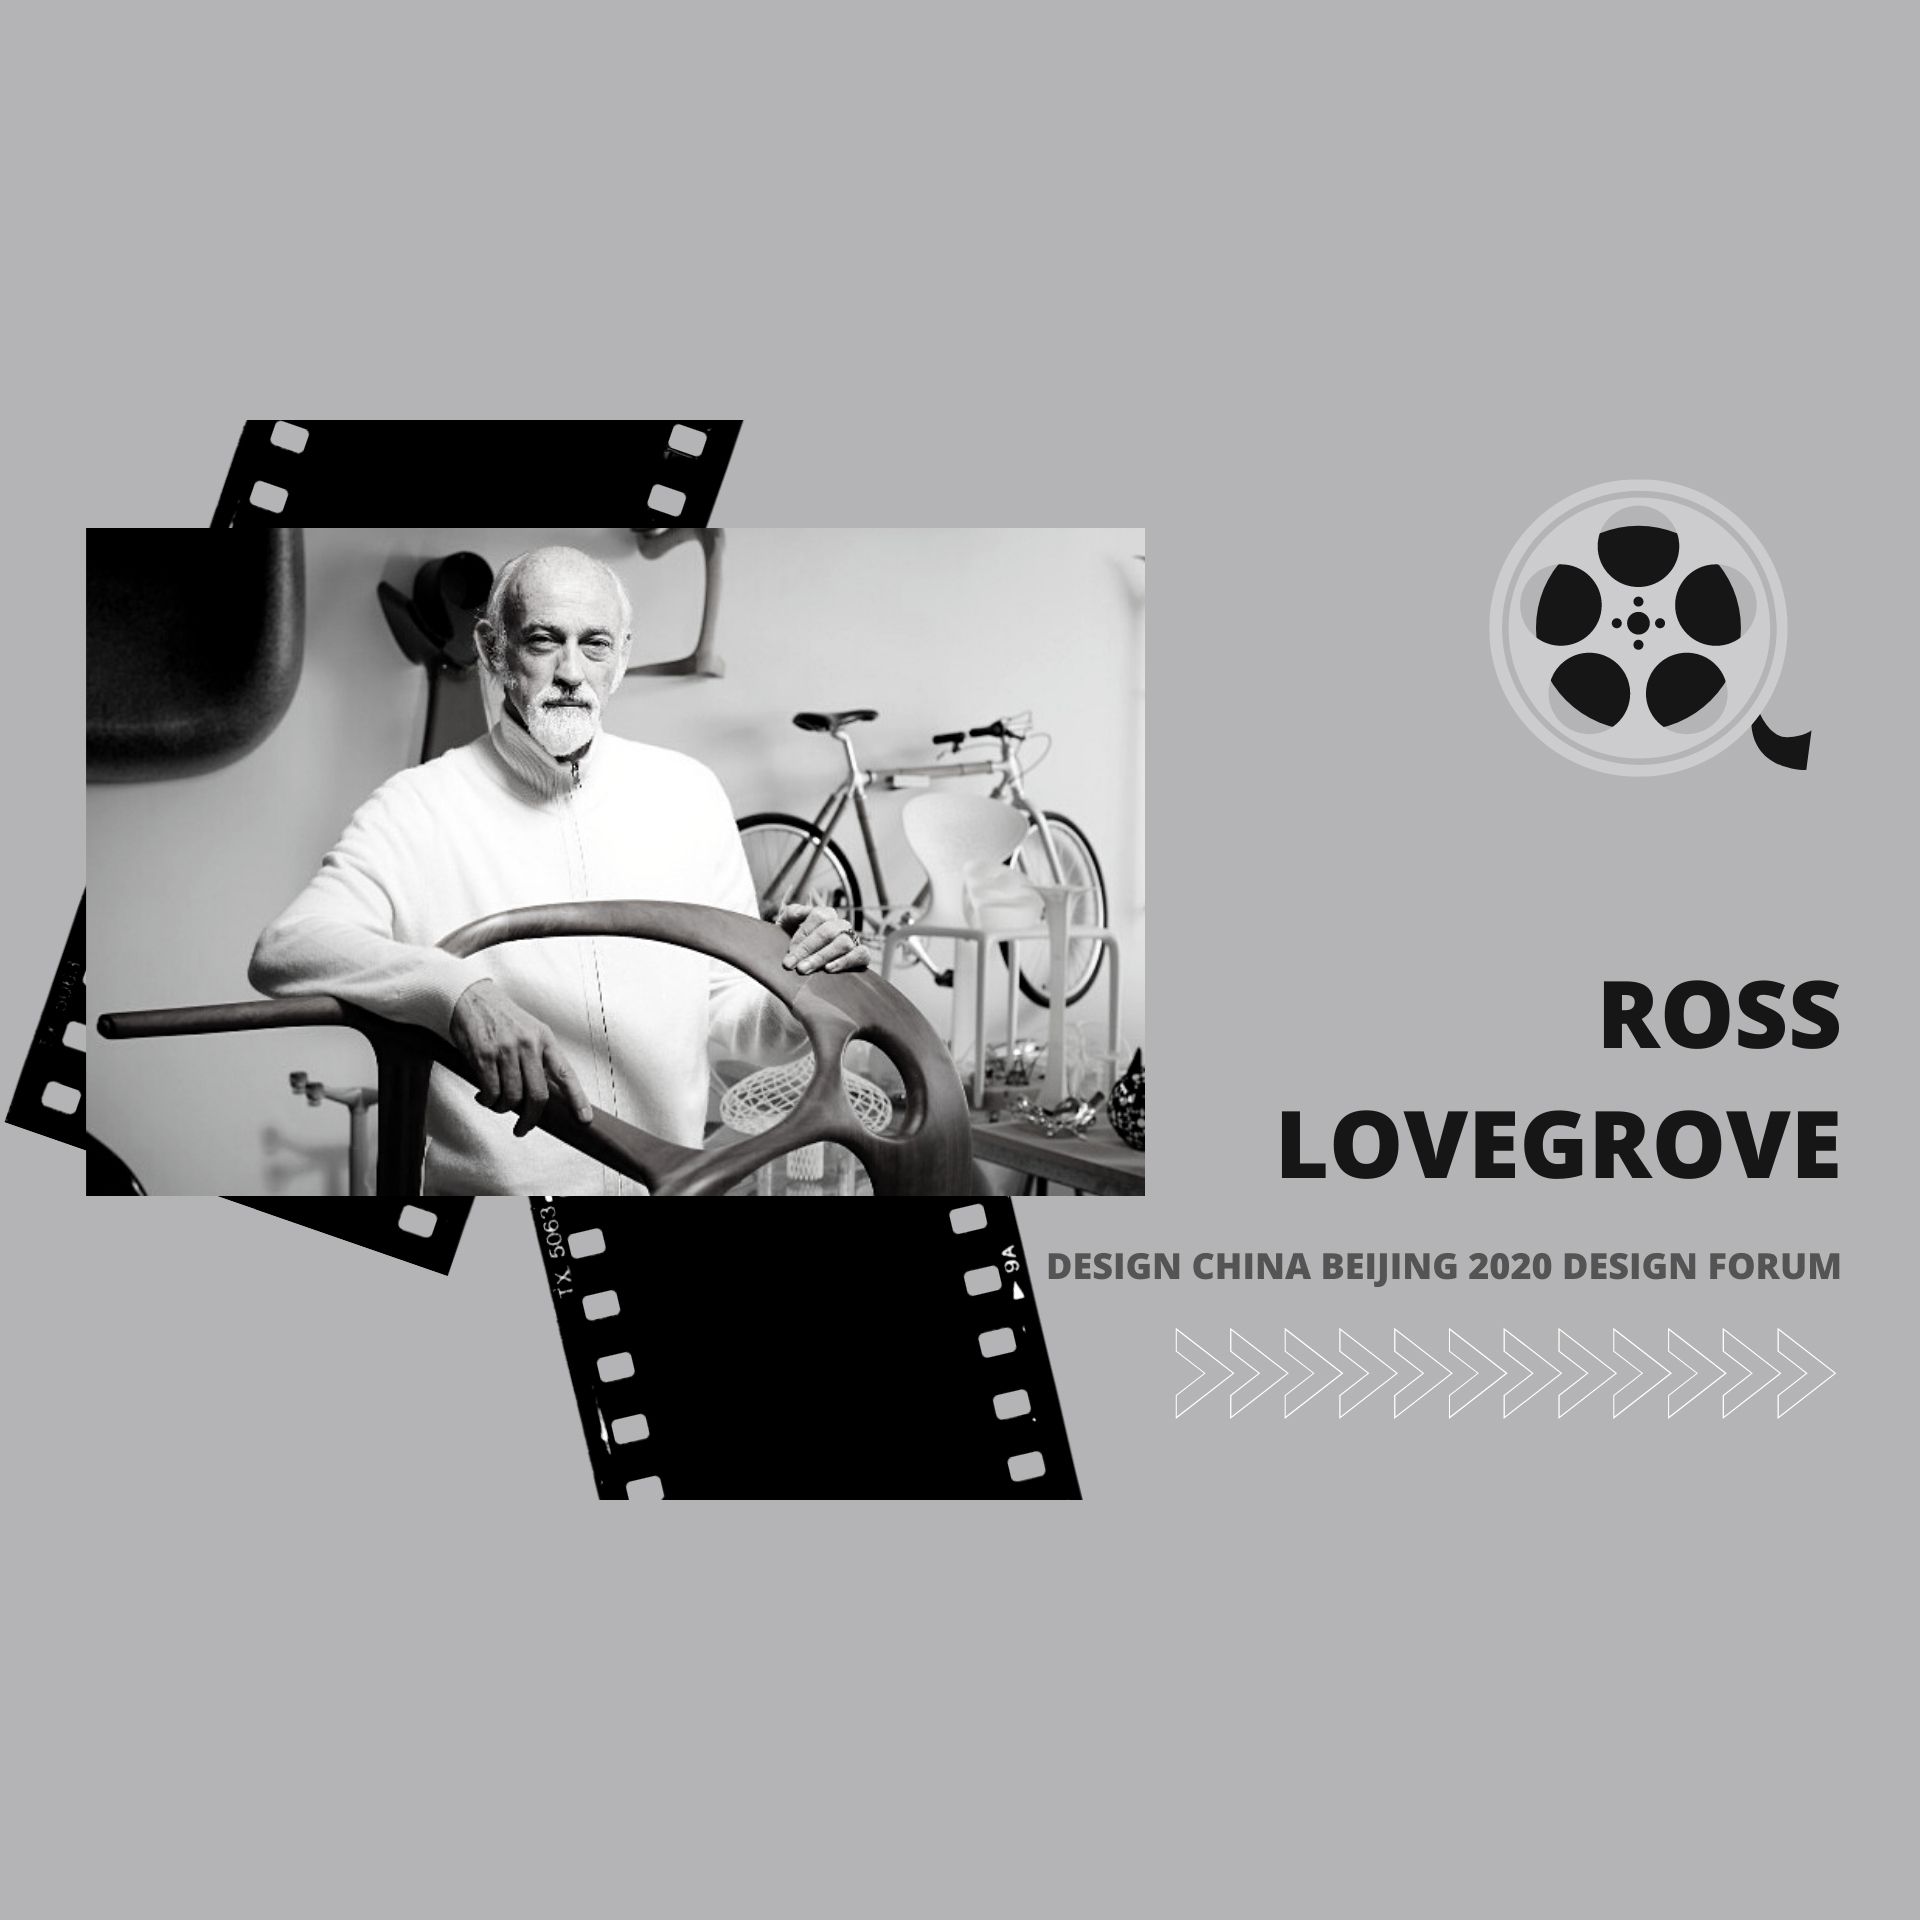 ROSS LOVEGROVE: THE SEARCH FOR IMMACULATE FORM